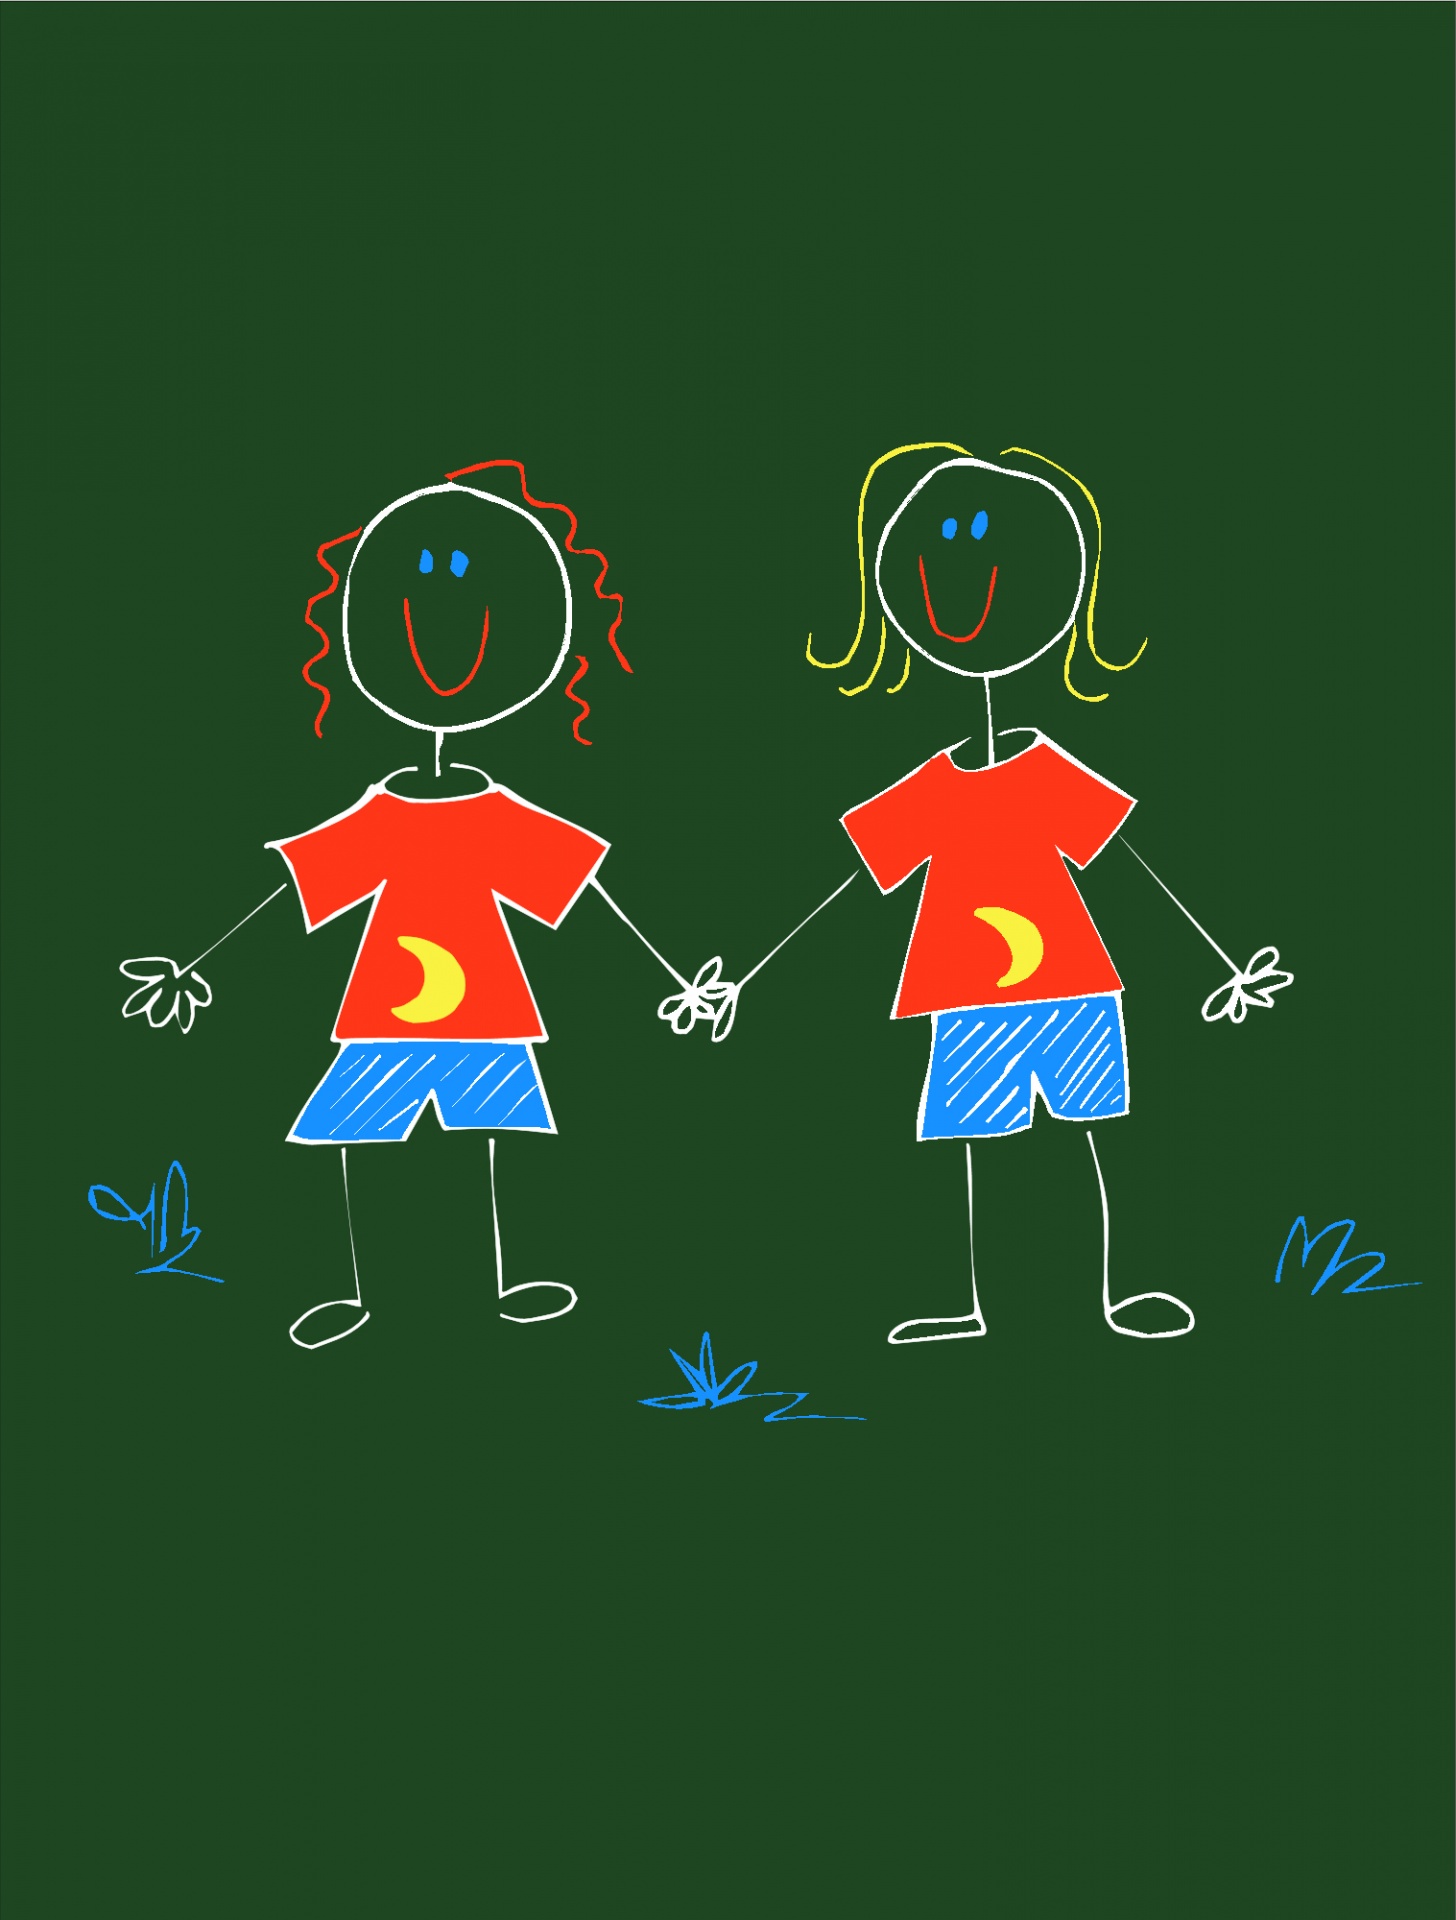 Boy Girl Friends Painting Drawing Free Image From Needpix Com